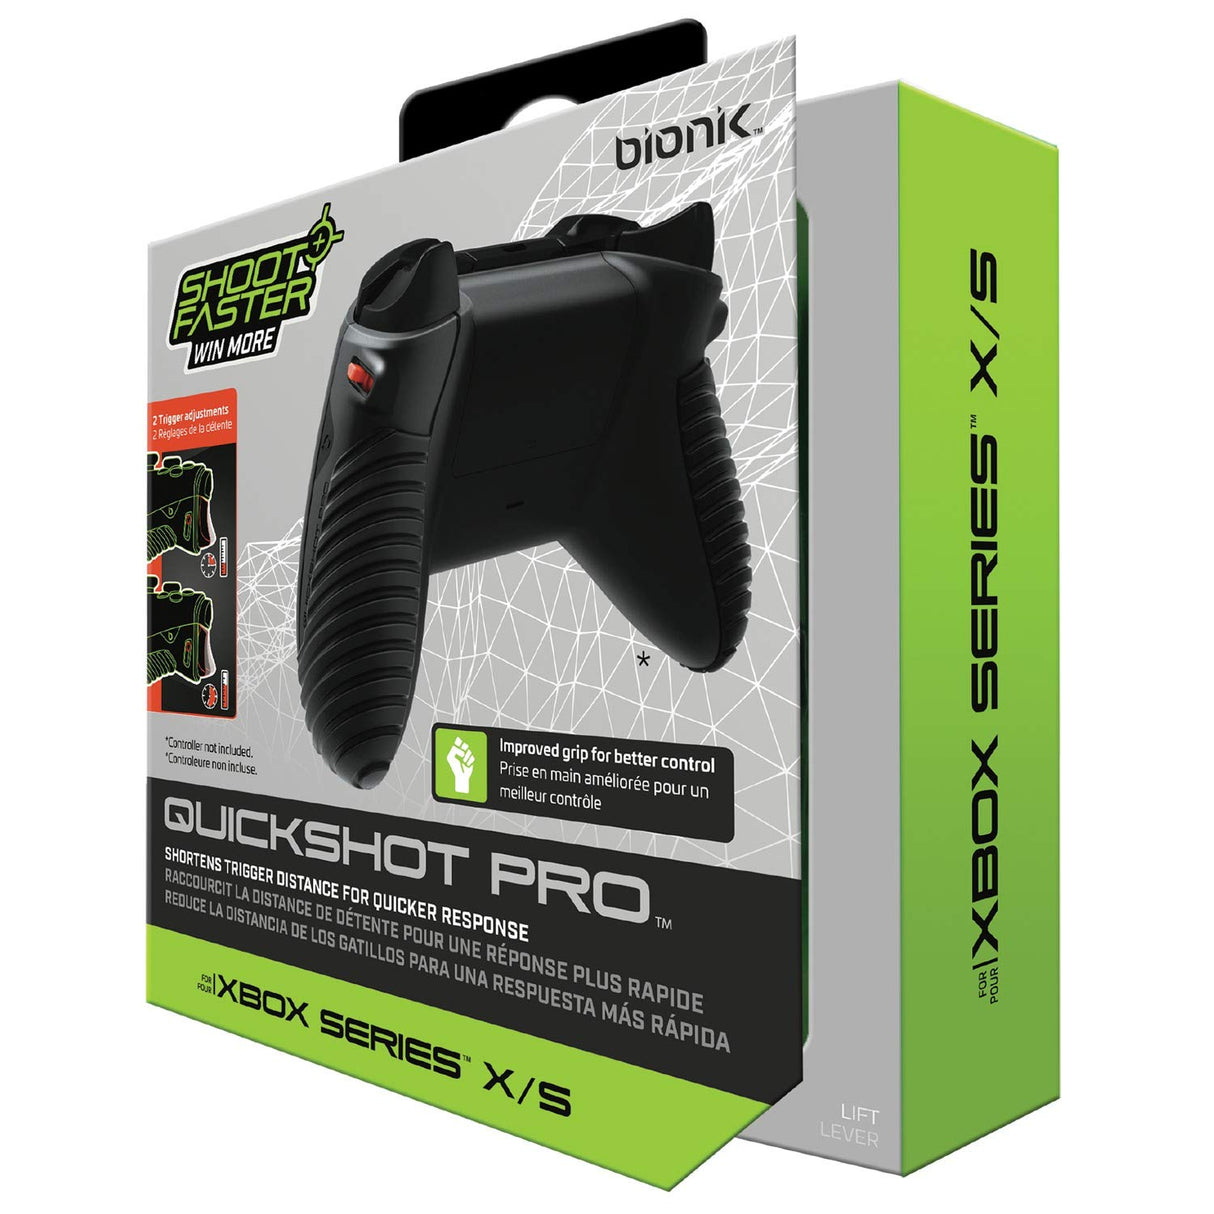 Bionik Quickshot Pro For Xbox Series X/S: Custom Grip and Dual Trigger locks for Faster Shots and Improved Gameplay Black